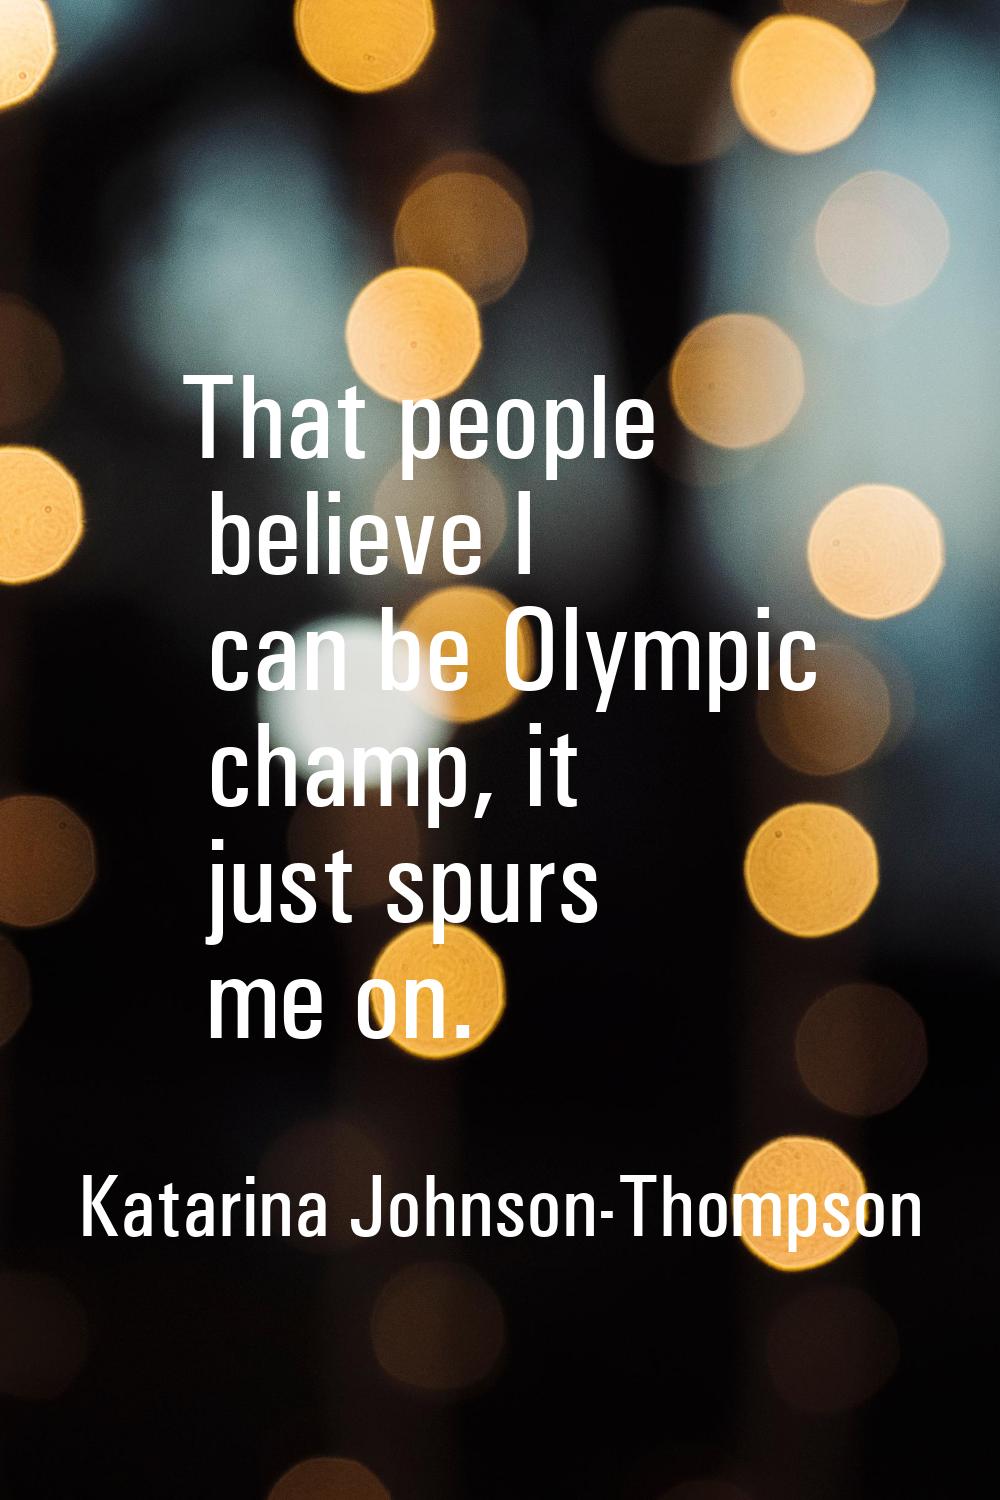 That people believe I can be Olympic champ, it just spurs me on.